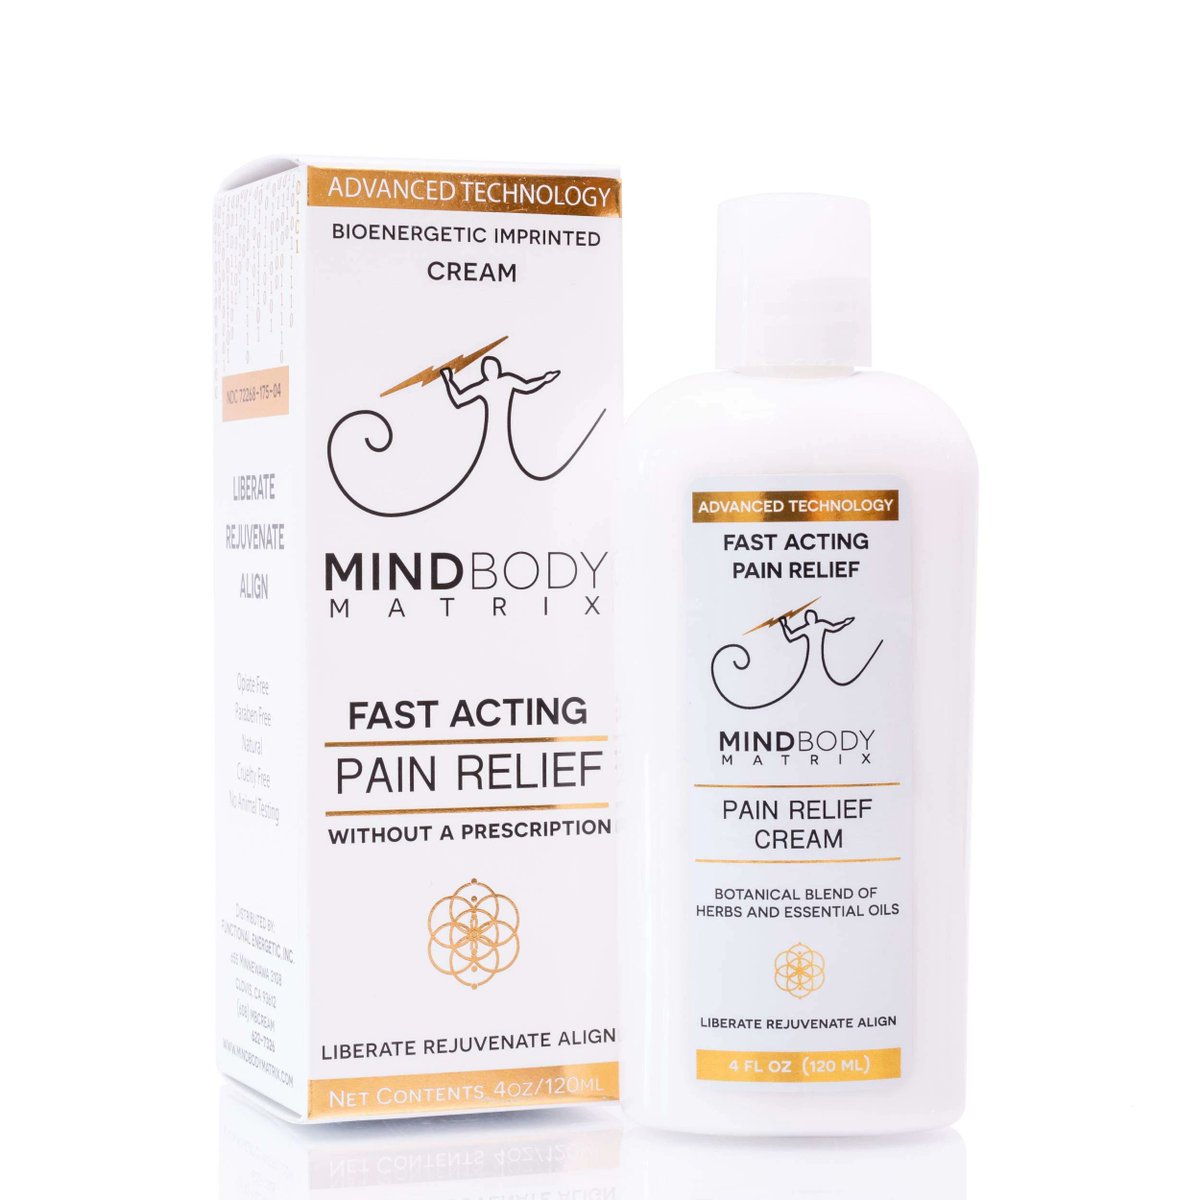 “Space Age Pain Treatment” Wipes Out Muscle, Nerve And Joint Discomfort In Less Than 30 Seconds.'
Now 👉cutt.ly/CGoRzHg
#men #women #painrelieft #painremove #mindbodymatrix #mindbodymatrixreviews #mindbodymatrixprice #jointpain #inflammatory #AloeVera #Recommend #USA